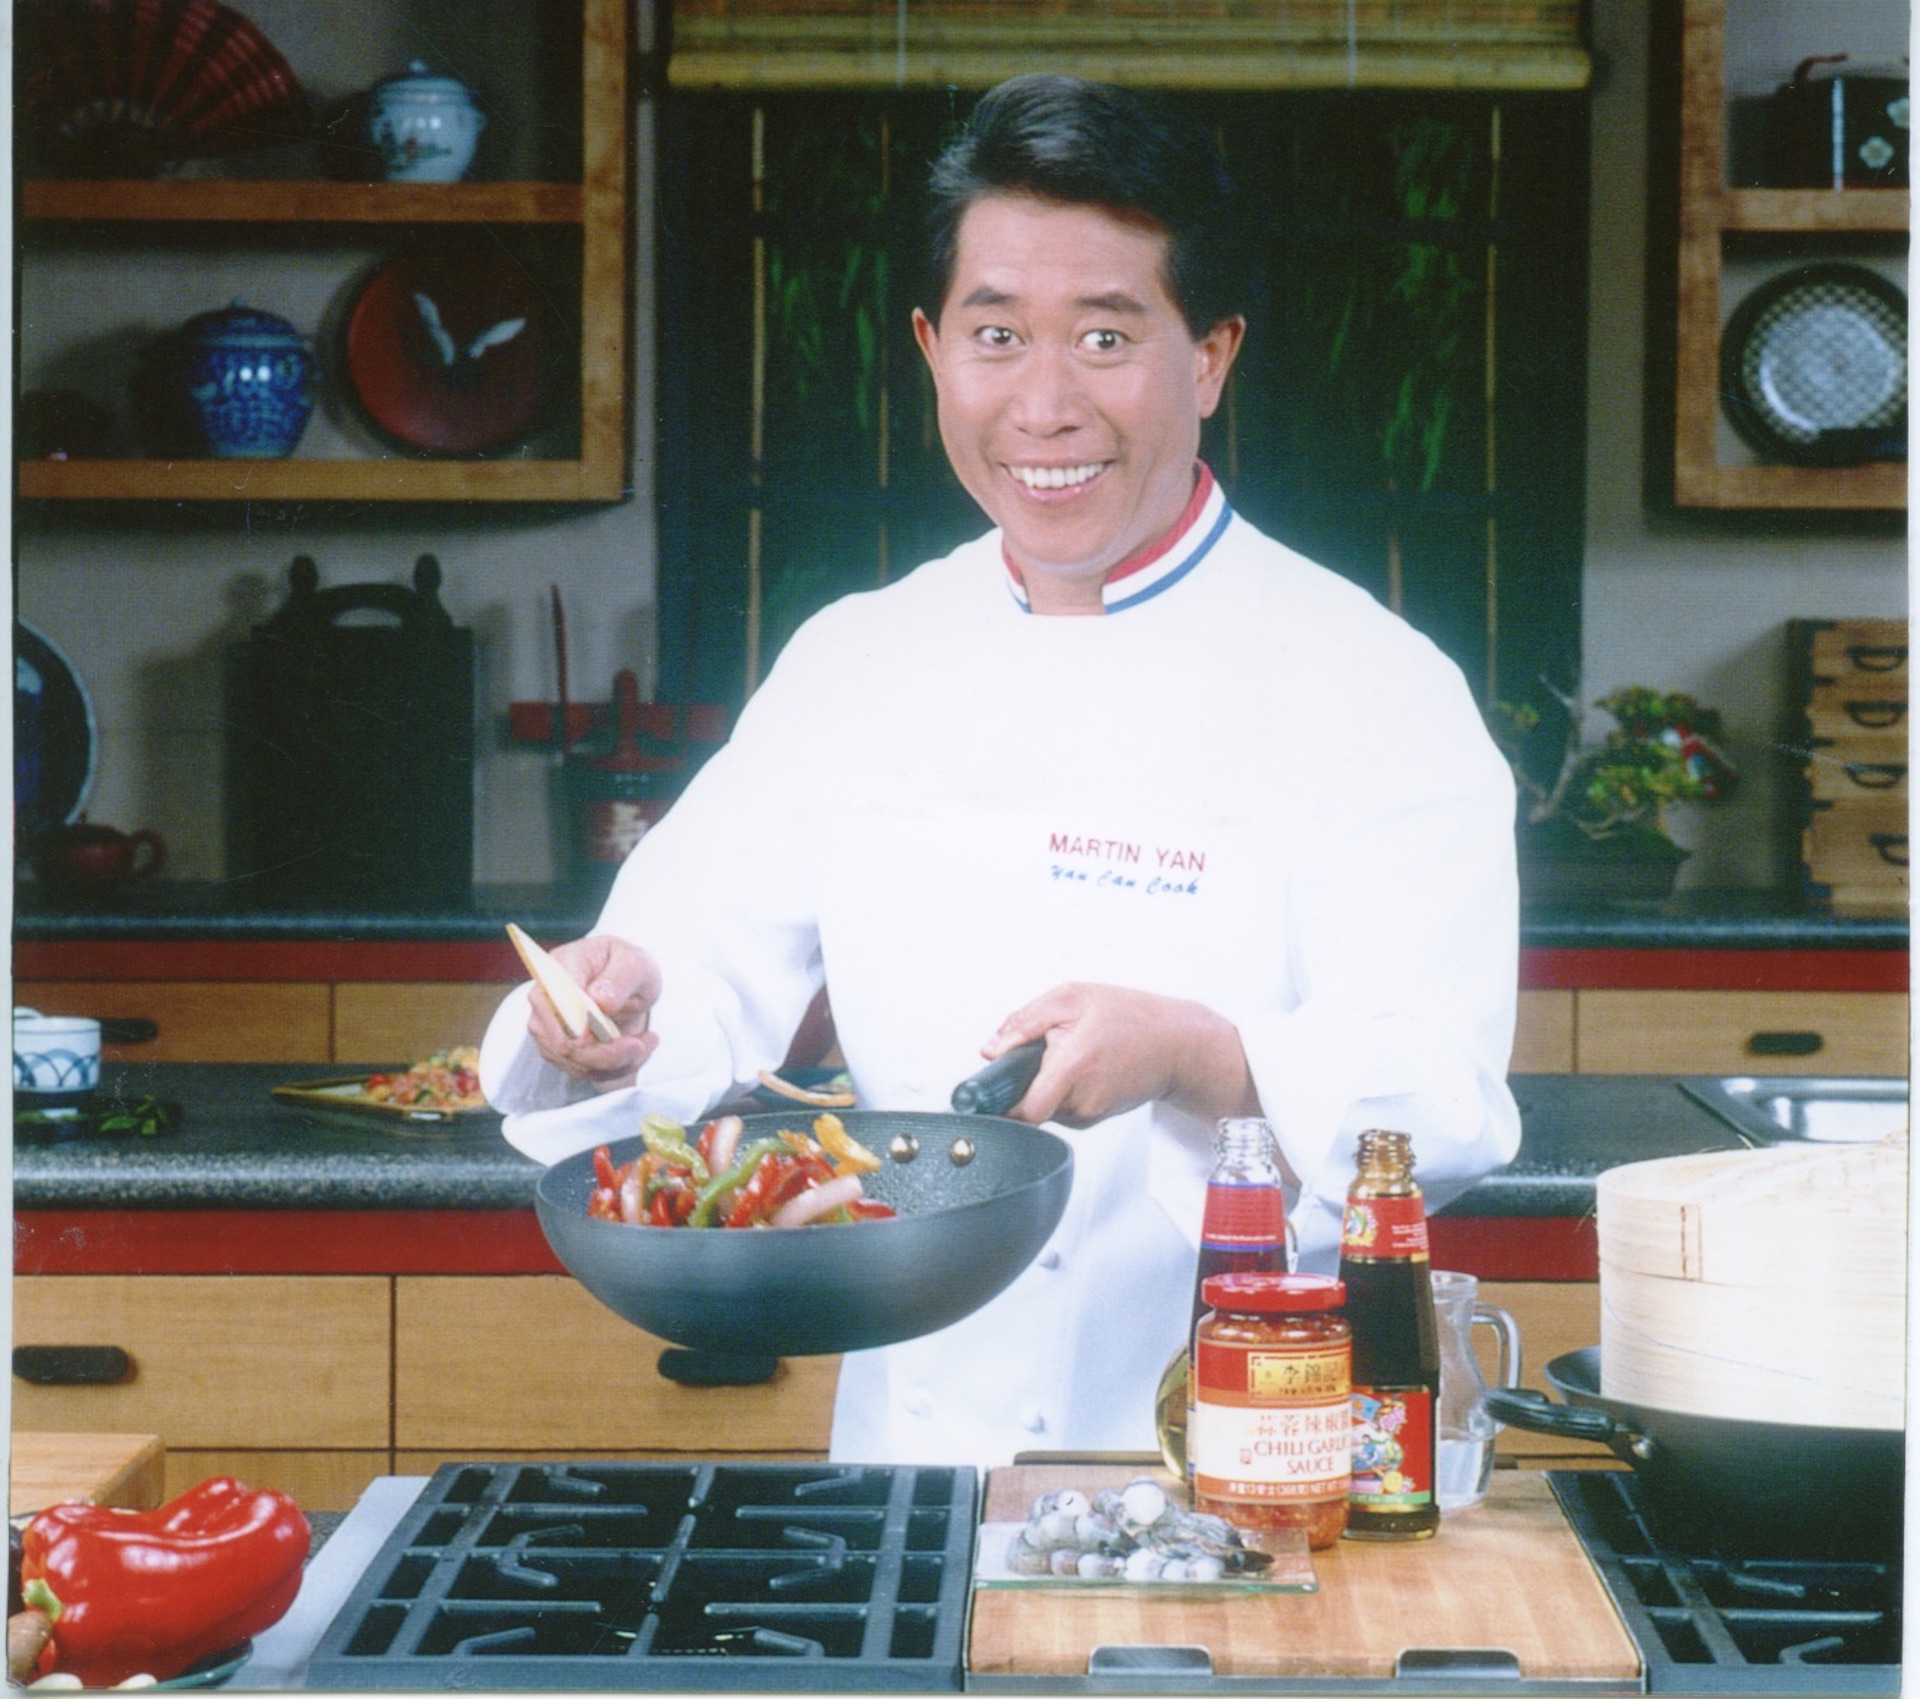 With his famous catchphrase "If Yan can cook, you can too!", chef Martin Yan introduced audiences to Chinese cooking techniques. 